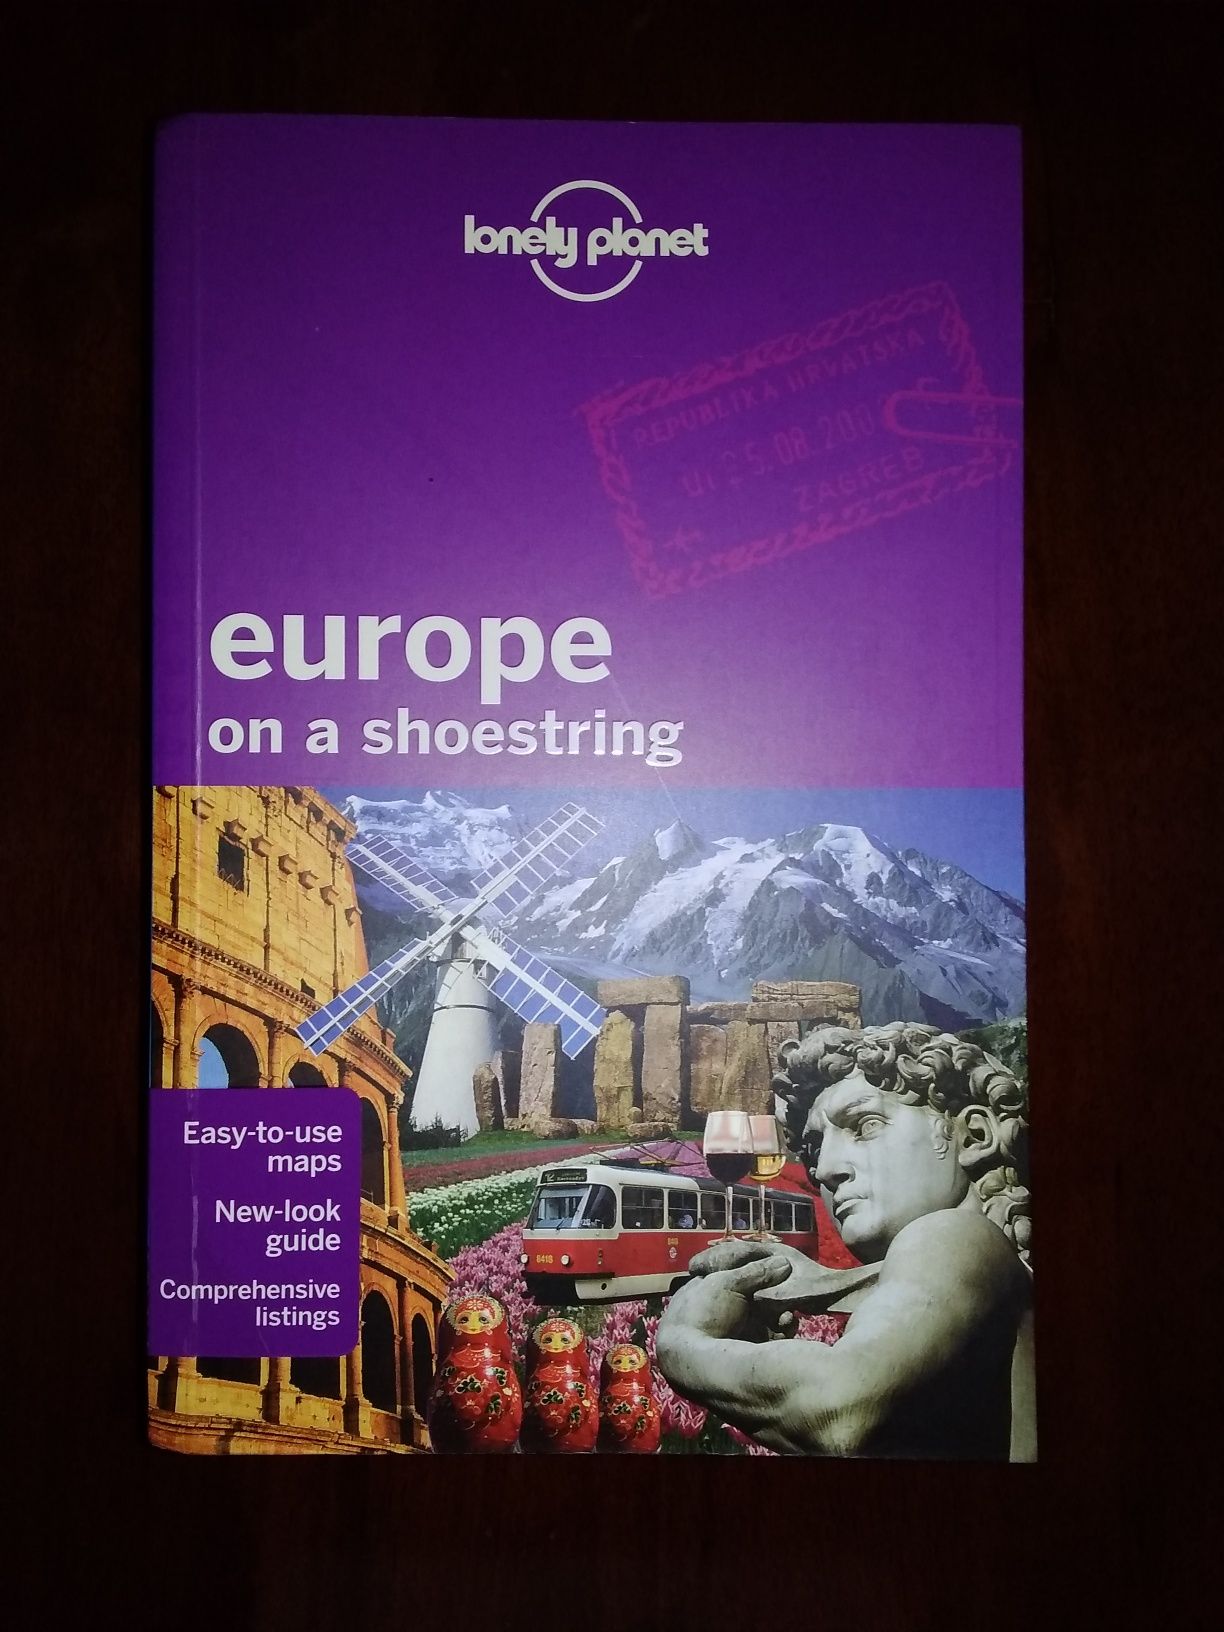 Lonely Planet - "Europe on a shoestring"